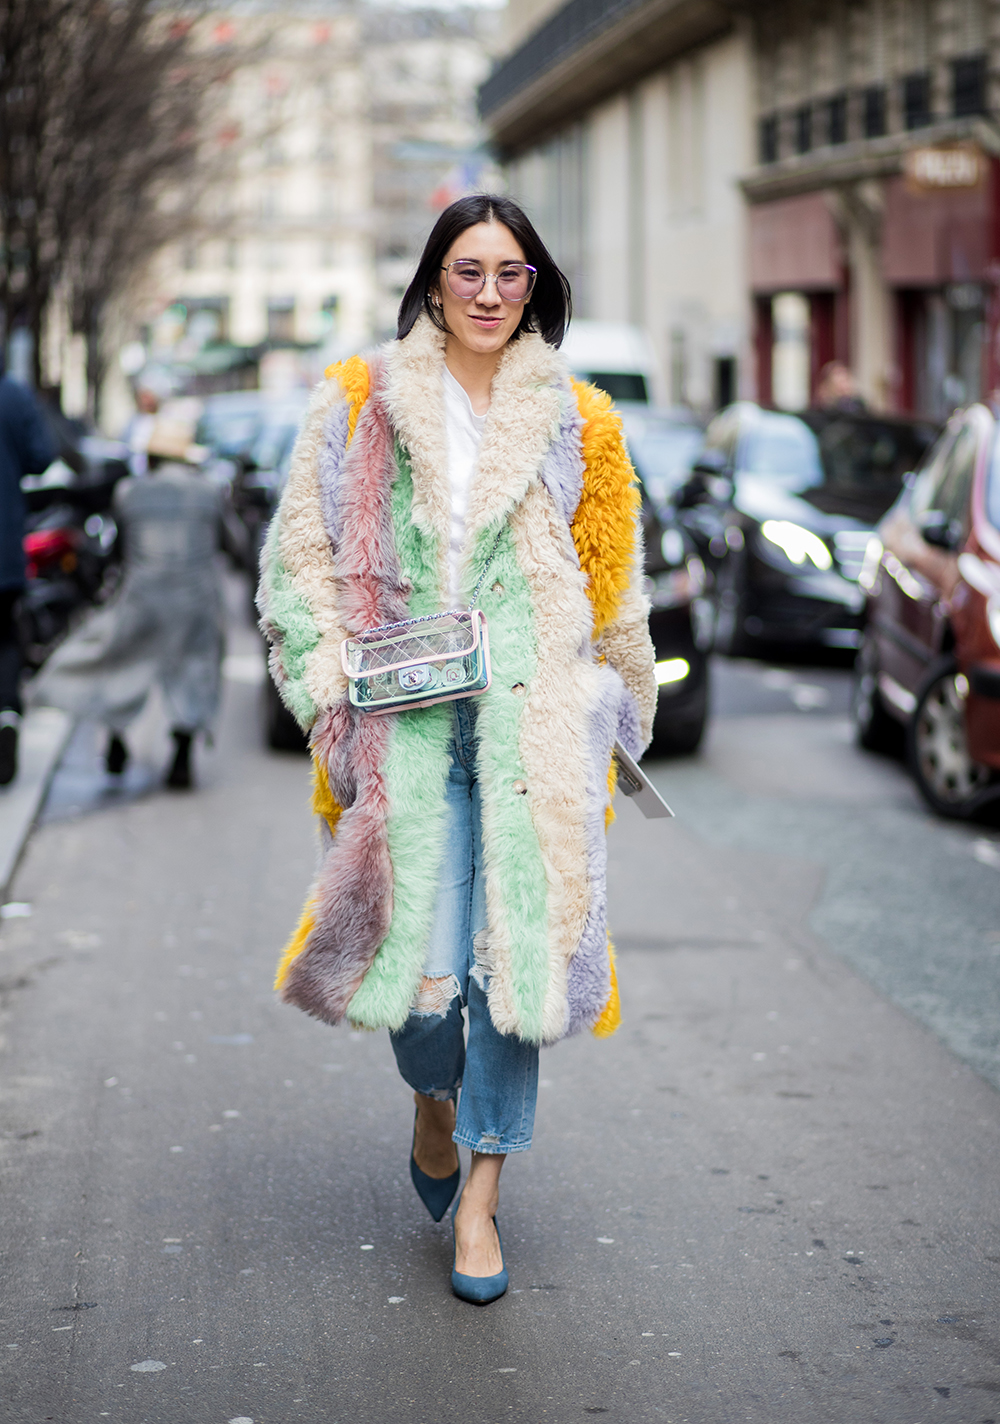 PARIS, FRANCE - MARCH 05: A guest is seen outside Sacai during Paris Fashion Week Womenswear Fall/Winter 2018/2019 on March 5, 2018 in Paris, France. (Photo by Christian Vierig/Getty Images)